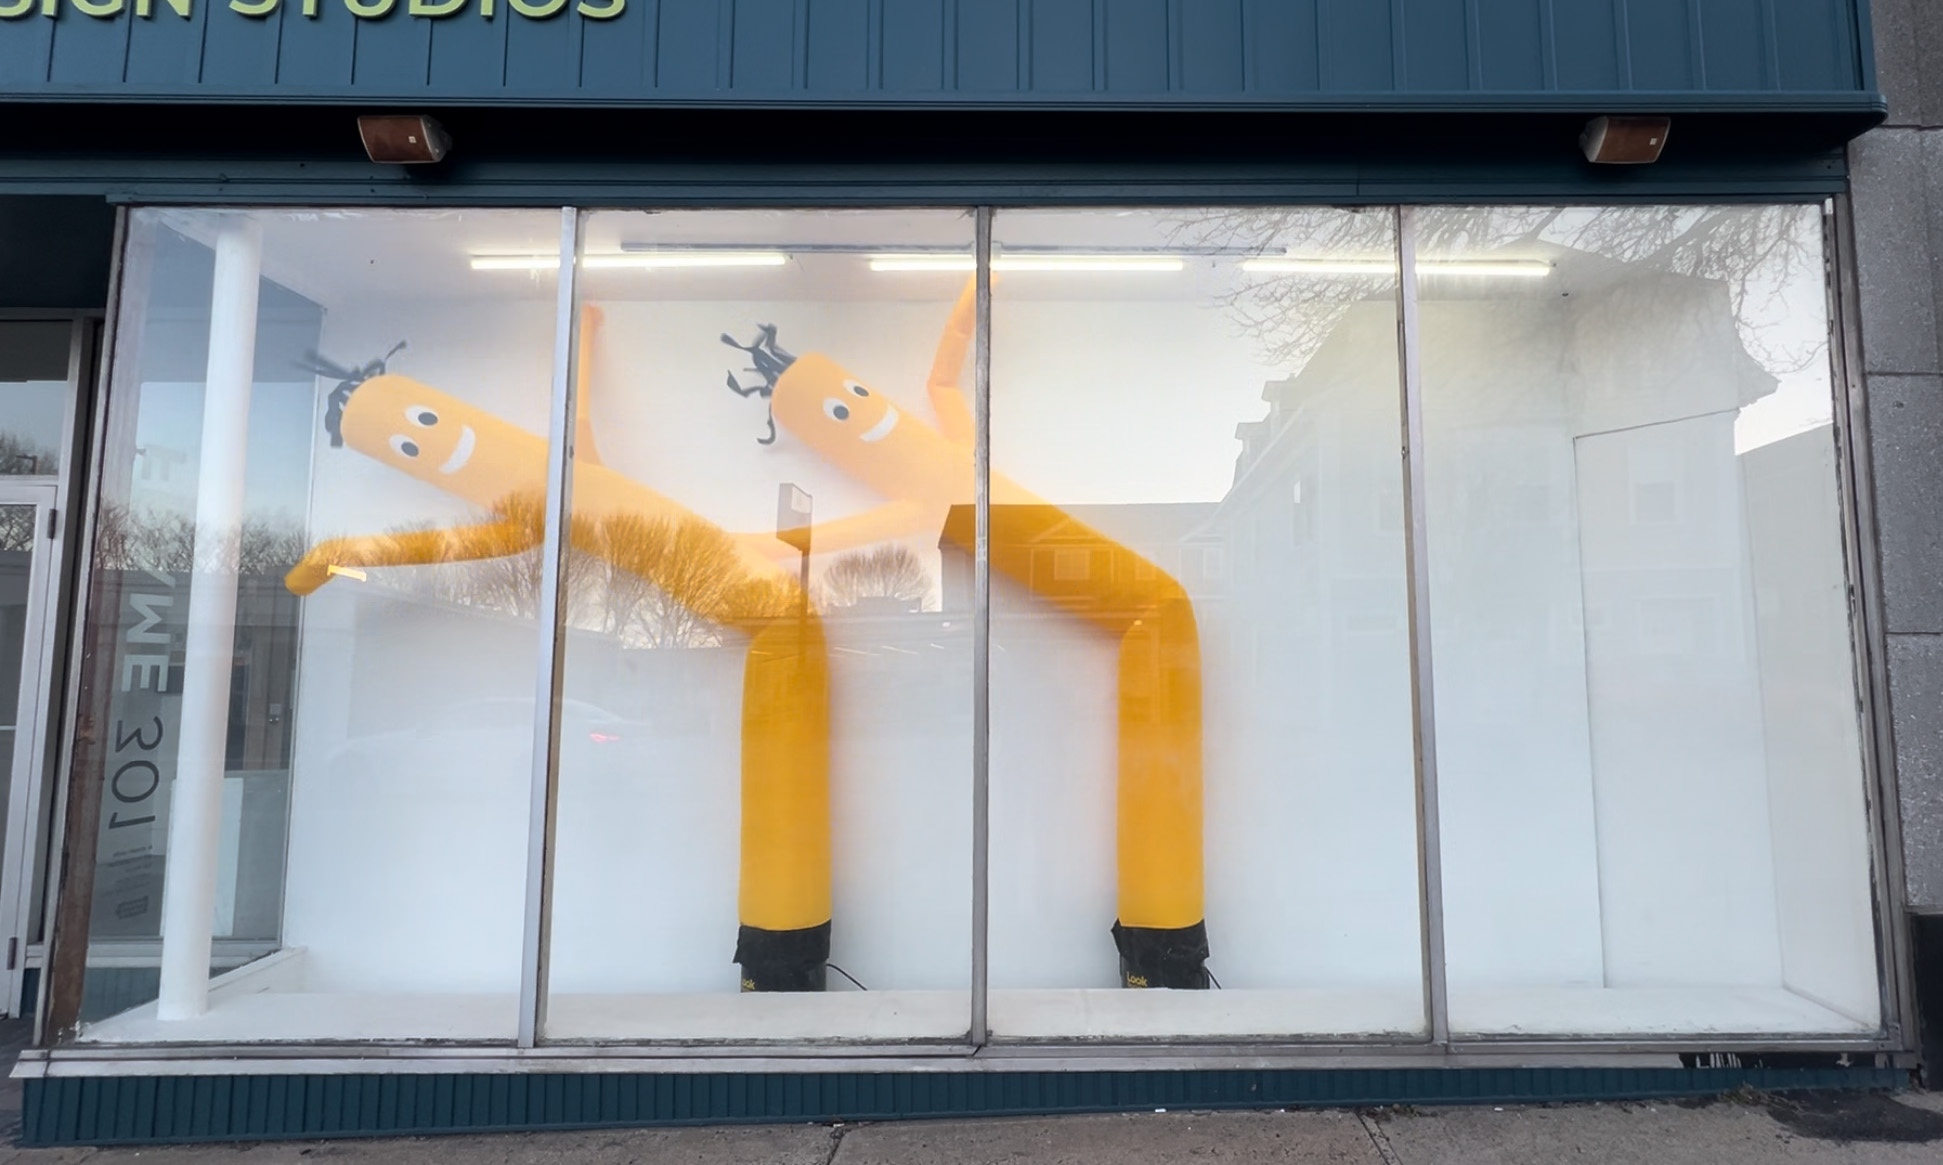 See our eye-catching window display, featuring a vibrant pair of yellow rods.